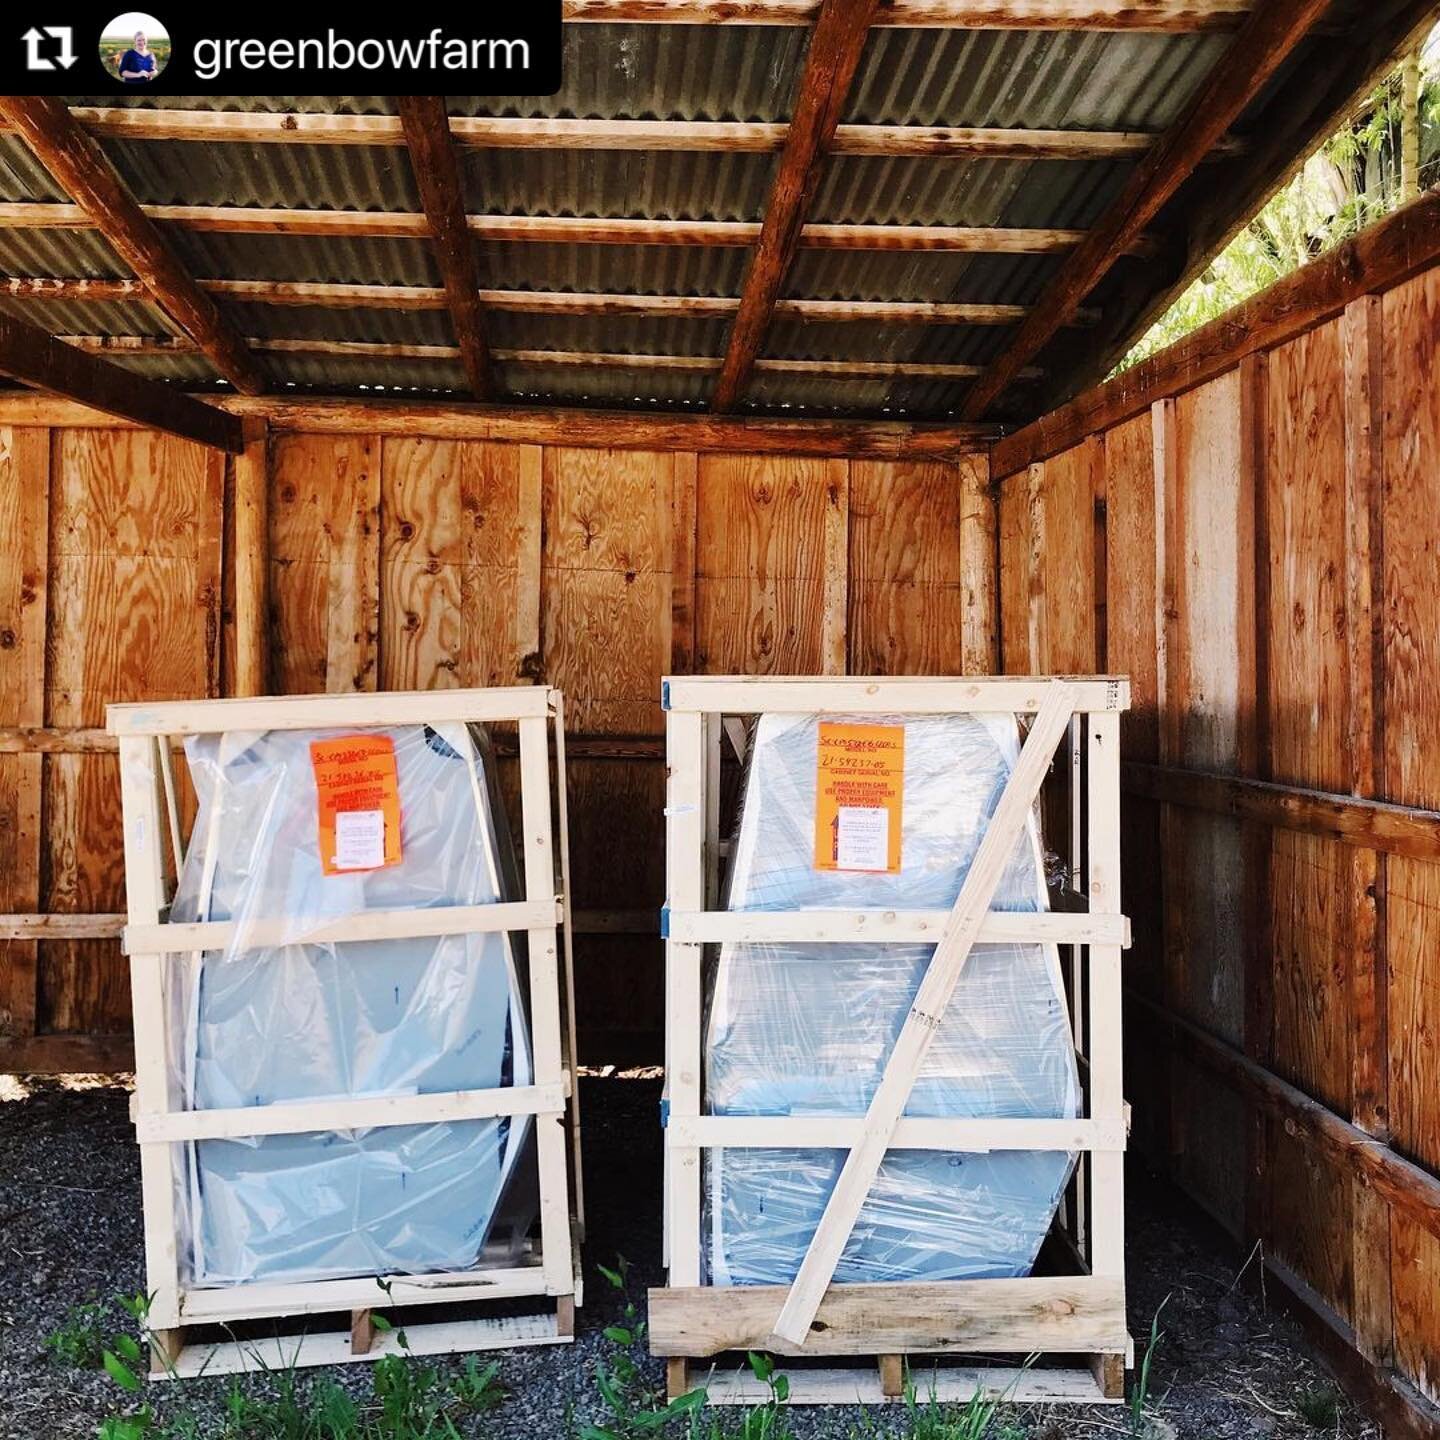 @greenbowfarm it was our pleasure!
・・・
Super Sexy Post Alert. Introducing Thelma and Louise our brand spanking new farm store display cases. These were made possible by a grant from the WSDA Meat Processor Pandemic Relief Grant which also helped us c